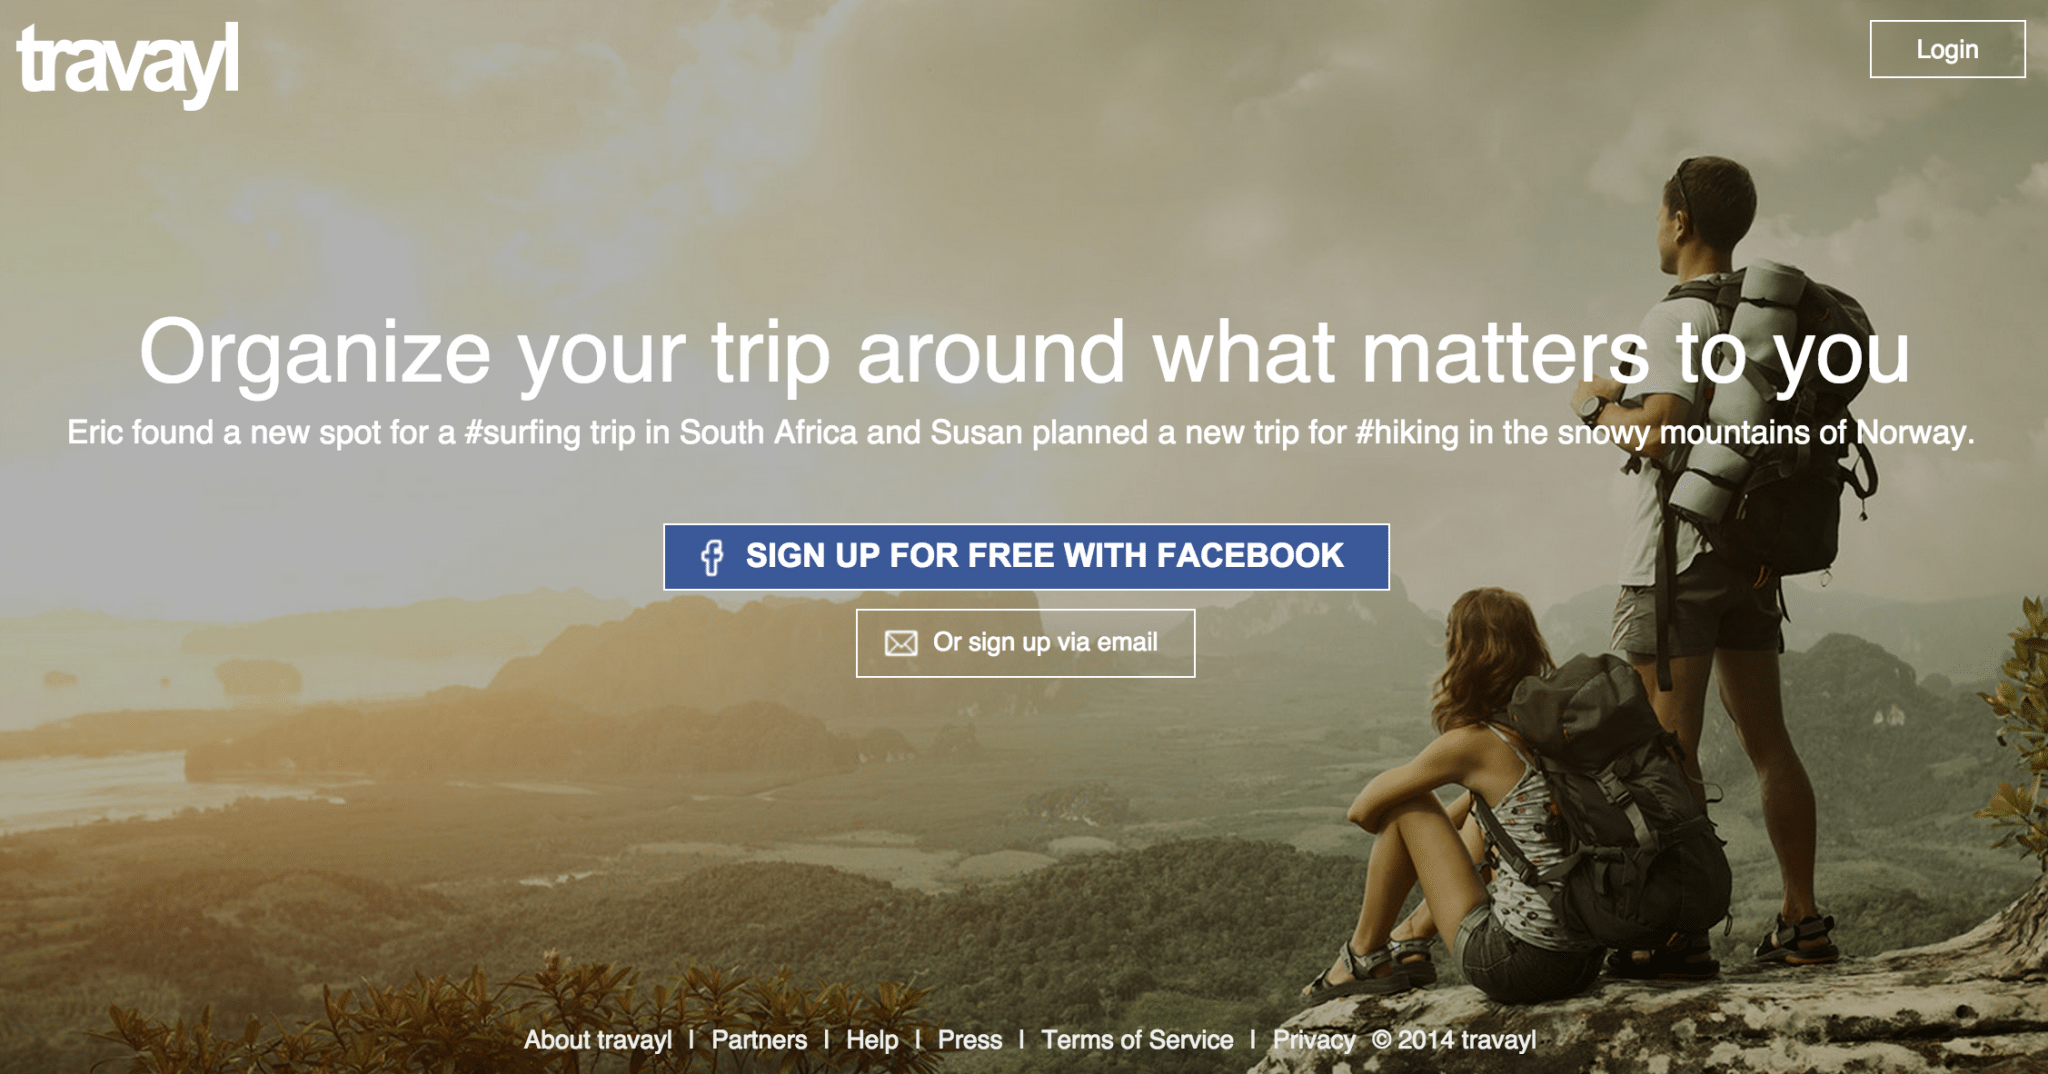 Travayl is a social travel platform that lets you get personalized recommendations based on your interests.